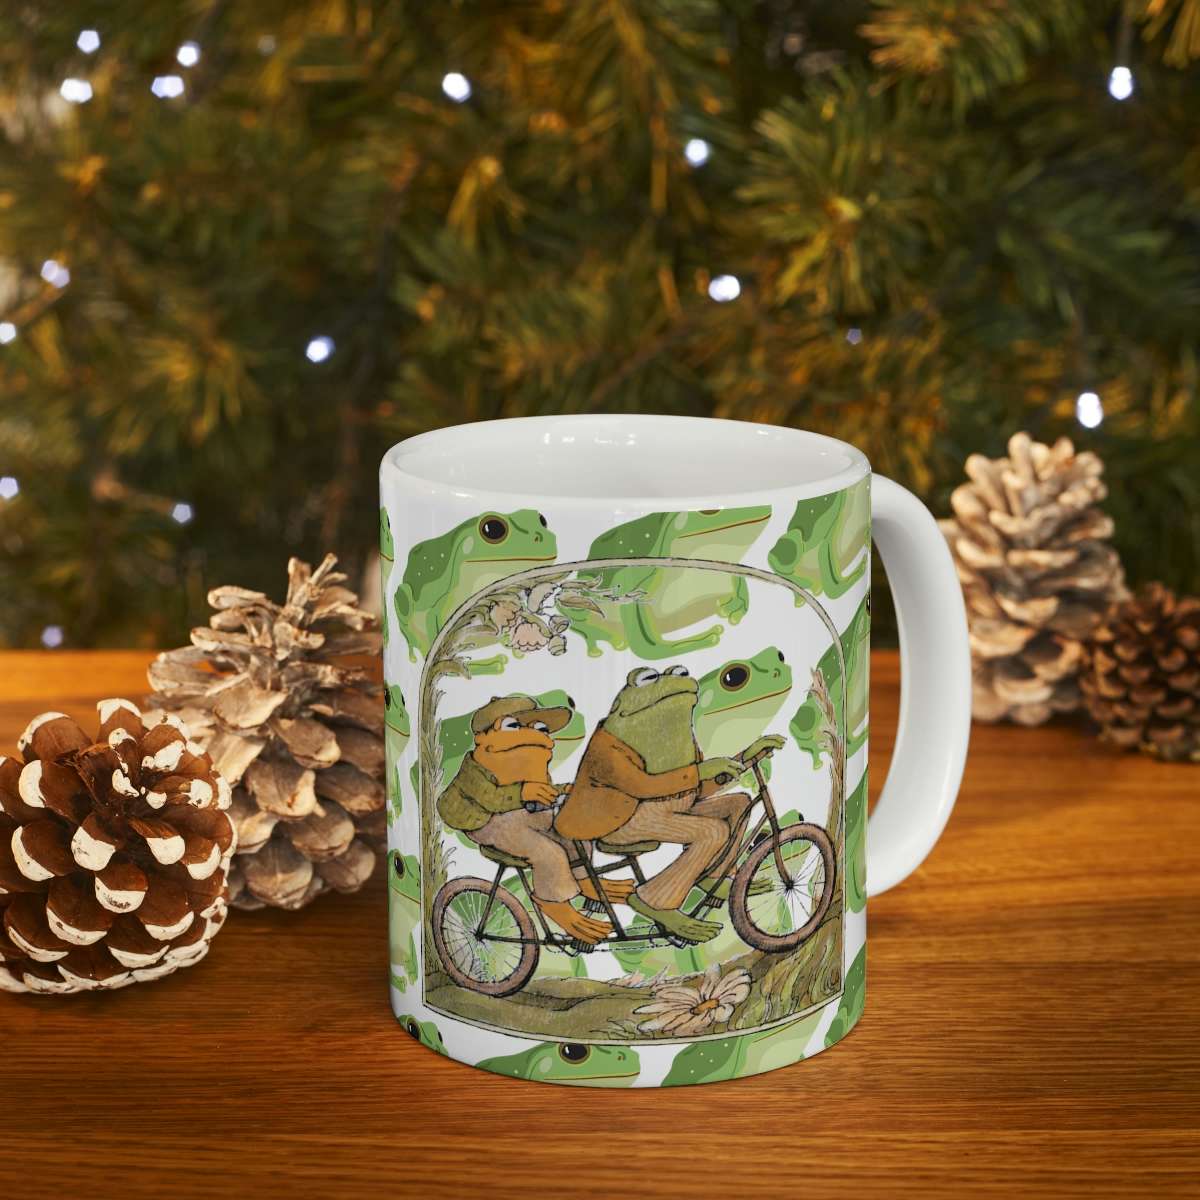 Toby The Toad Frog Coffee Mug Adorable with Gift Box